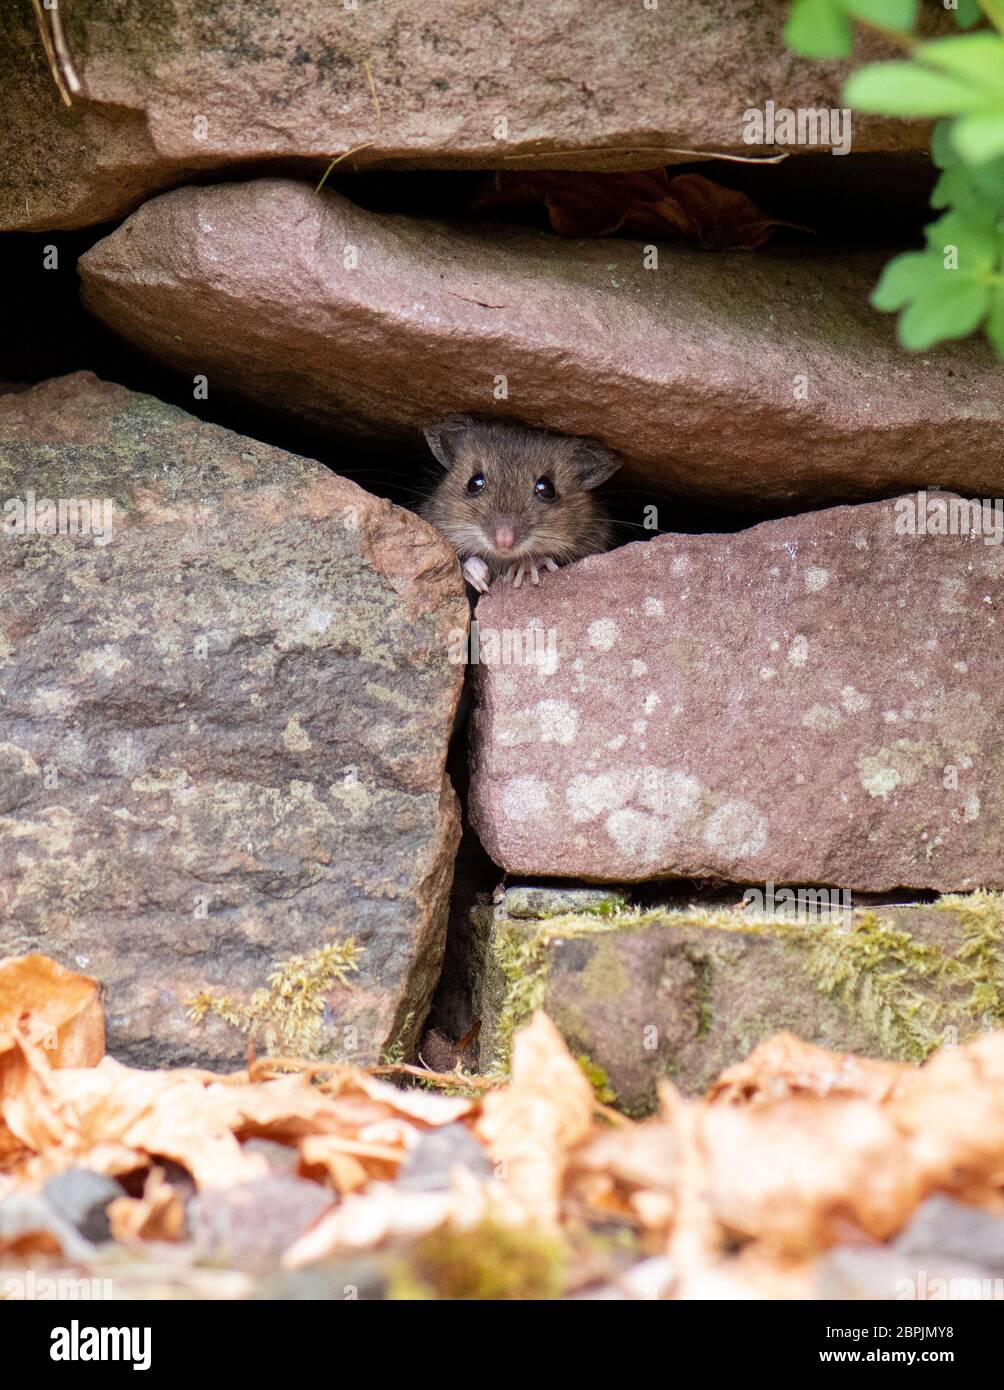 Wood Mouse - Apodemus sylvaticus - peeking out of dry stone wall in UK garden Stock Photo